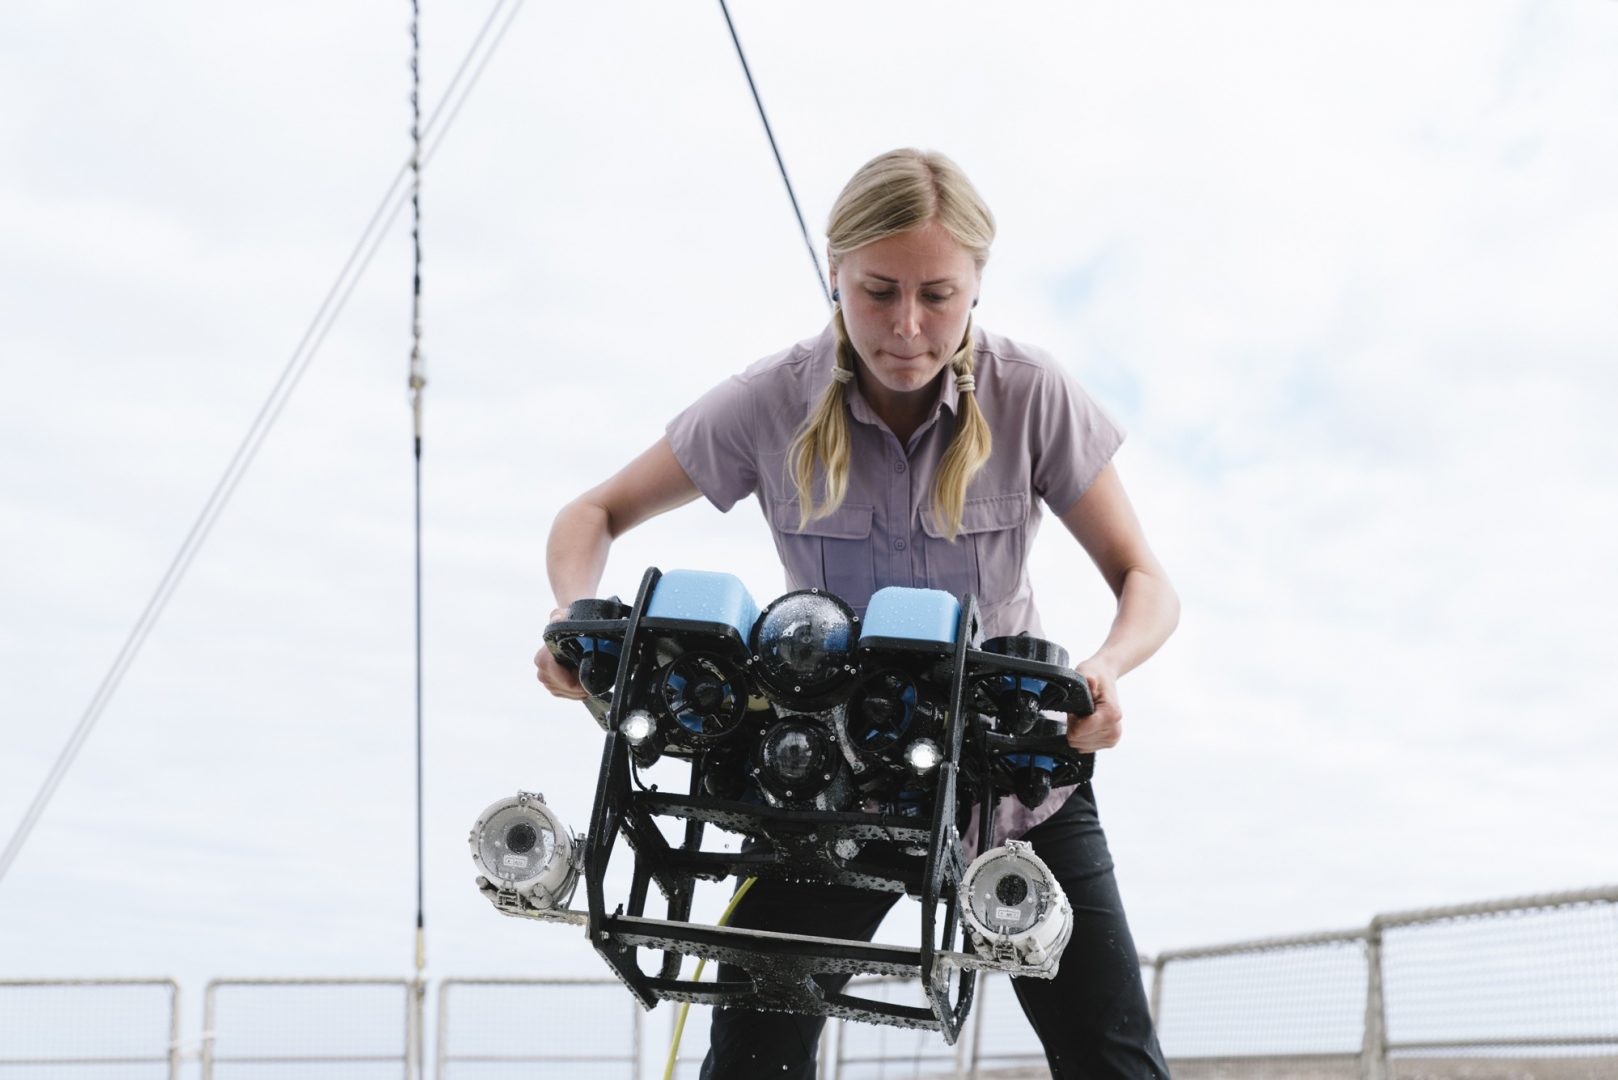 PHD student Darryn Sword prepares to lift the ROV into the water from the Rainbow Warrior III in the waters of The Great Australian Bight.